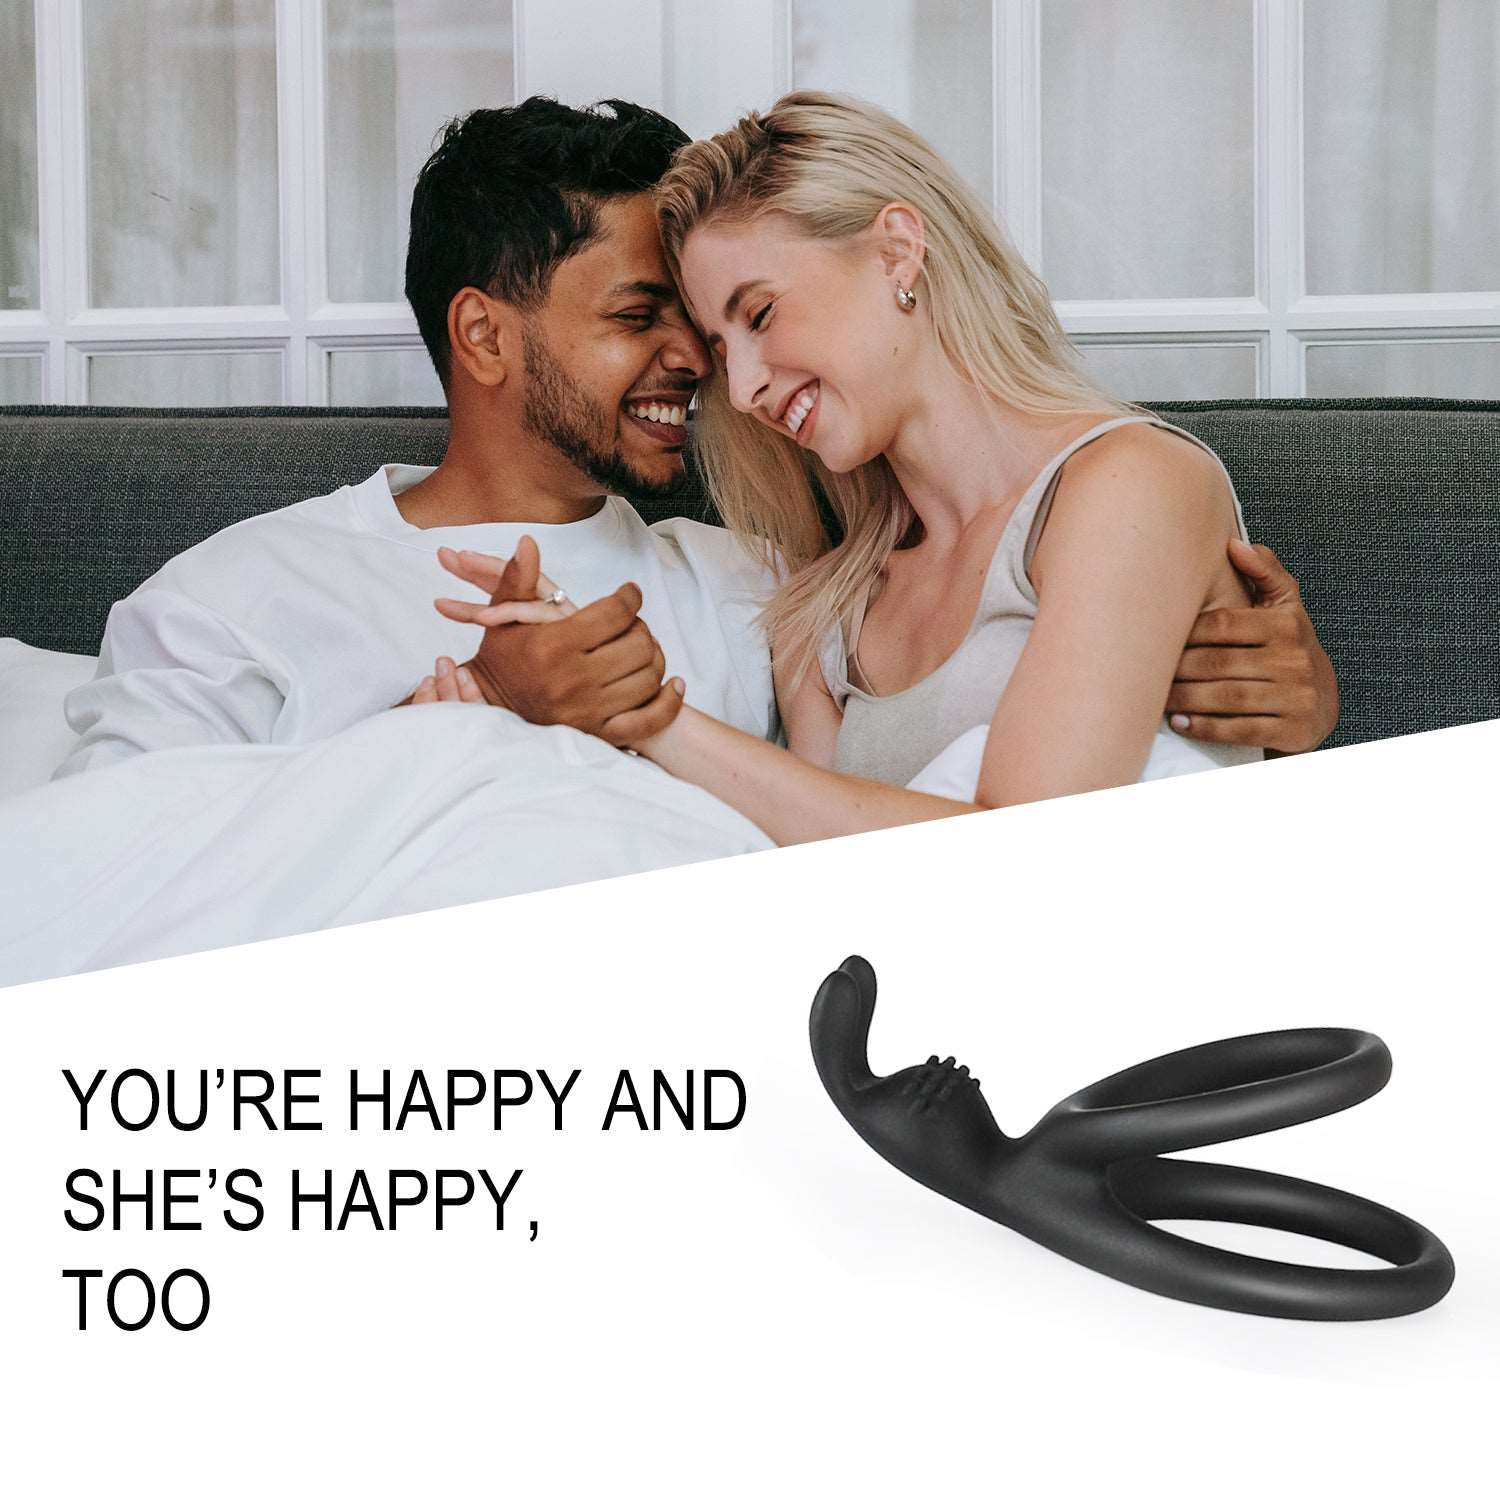 Silicone Cock Ring with Bunny Ears Double Ring